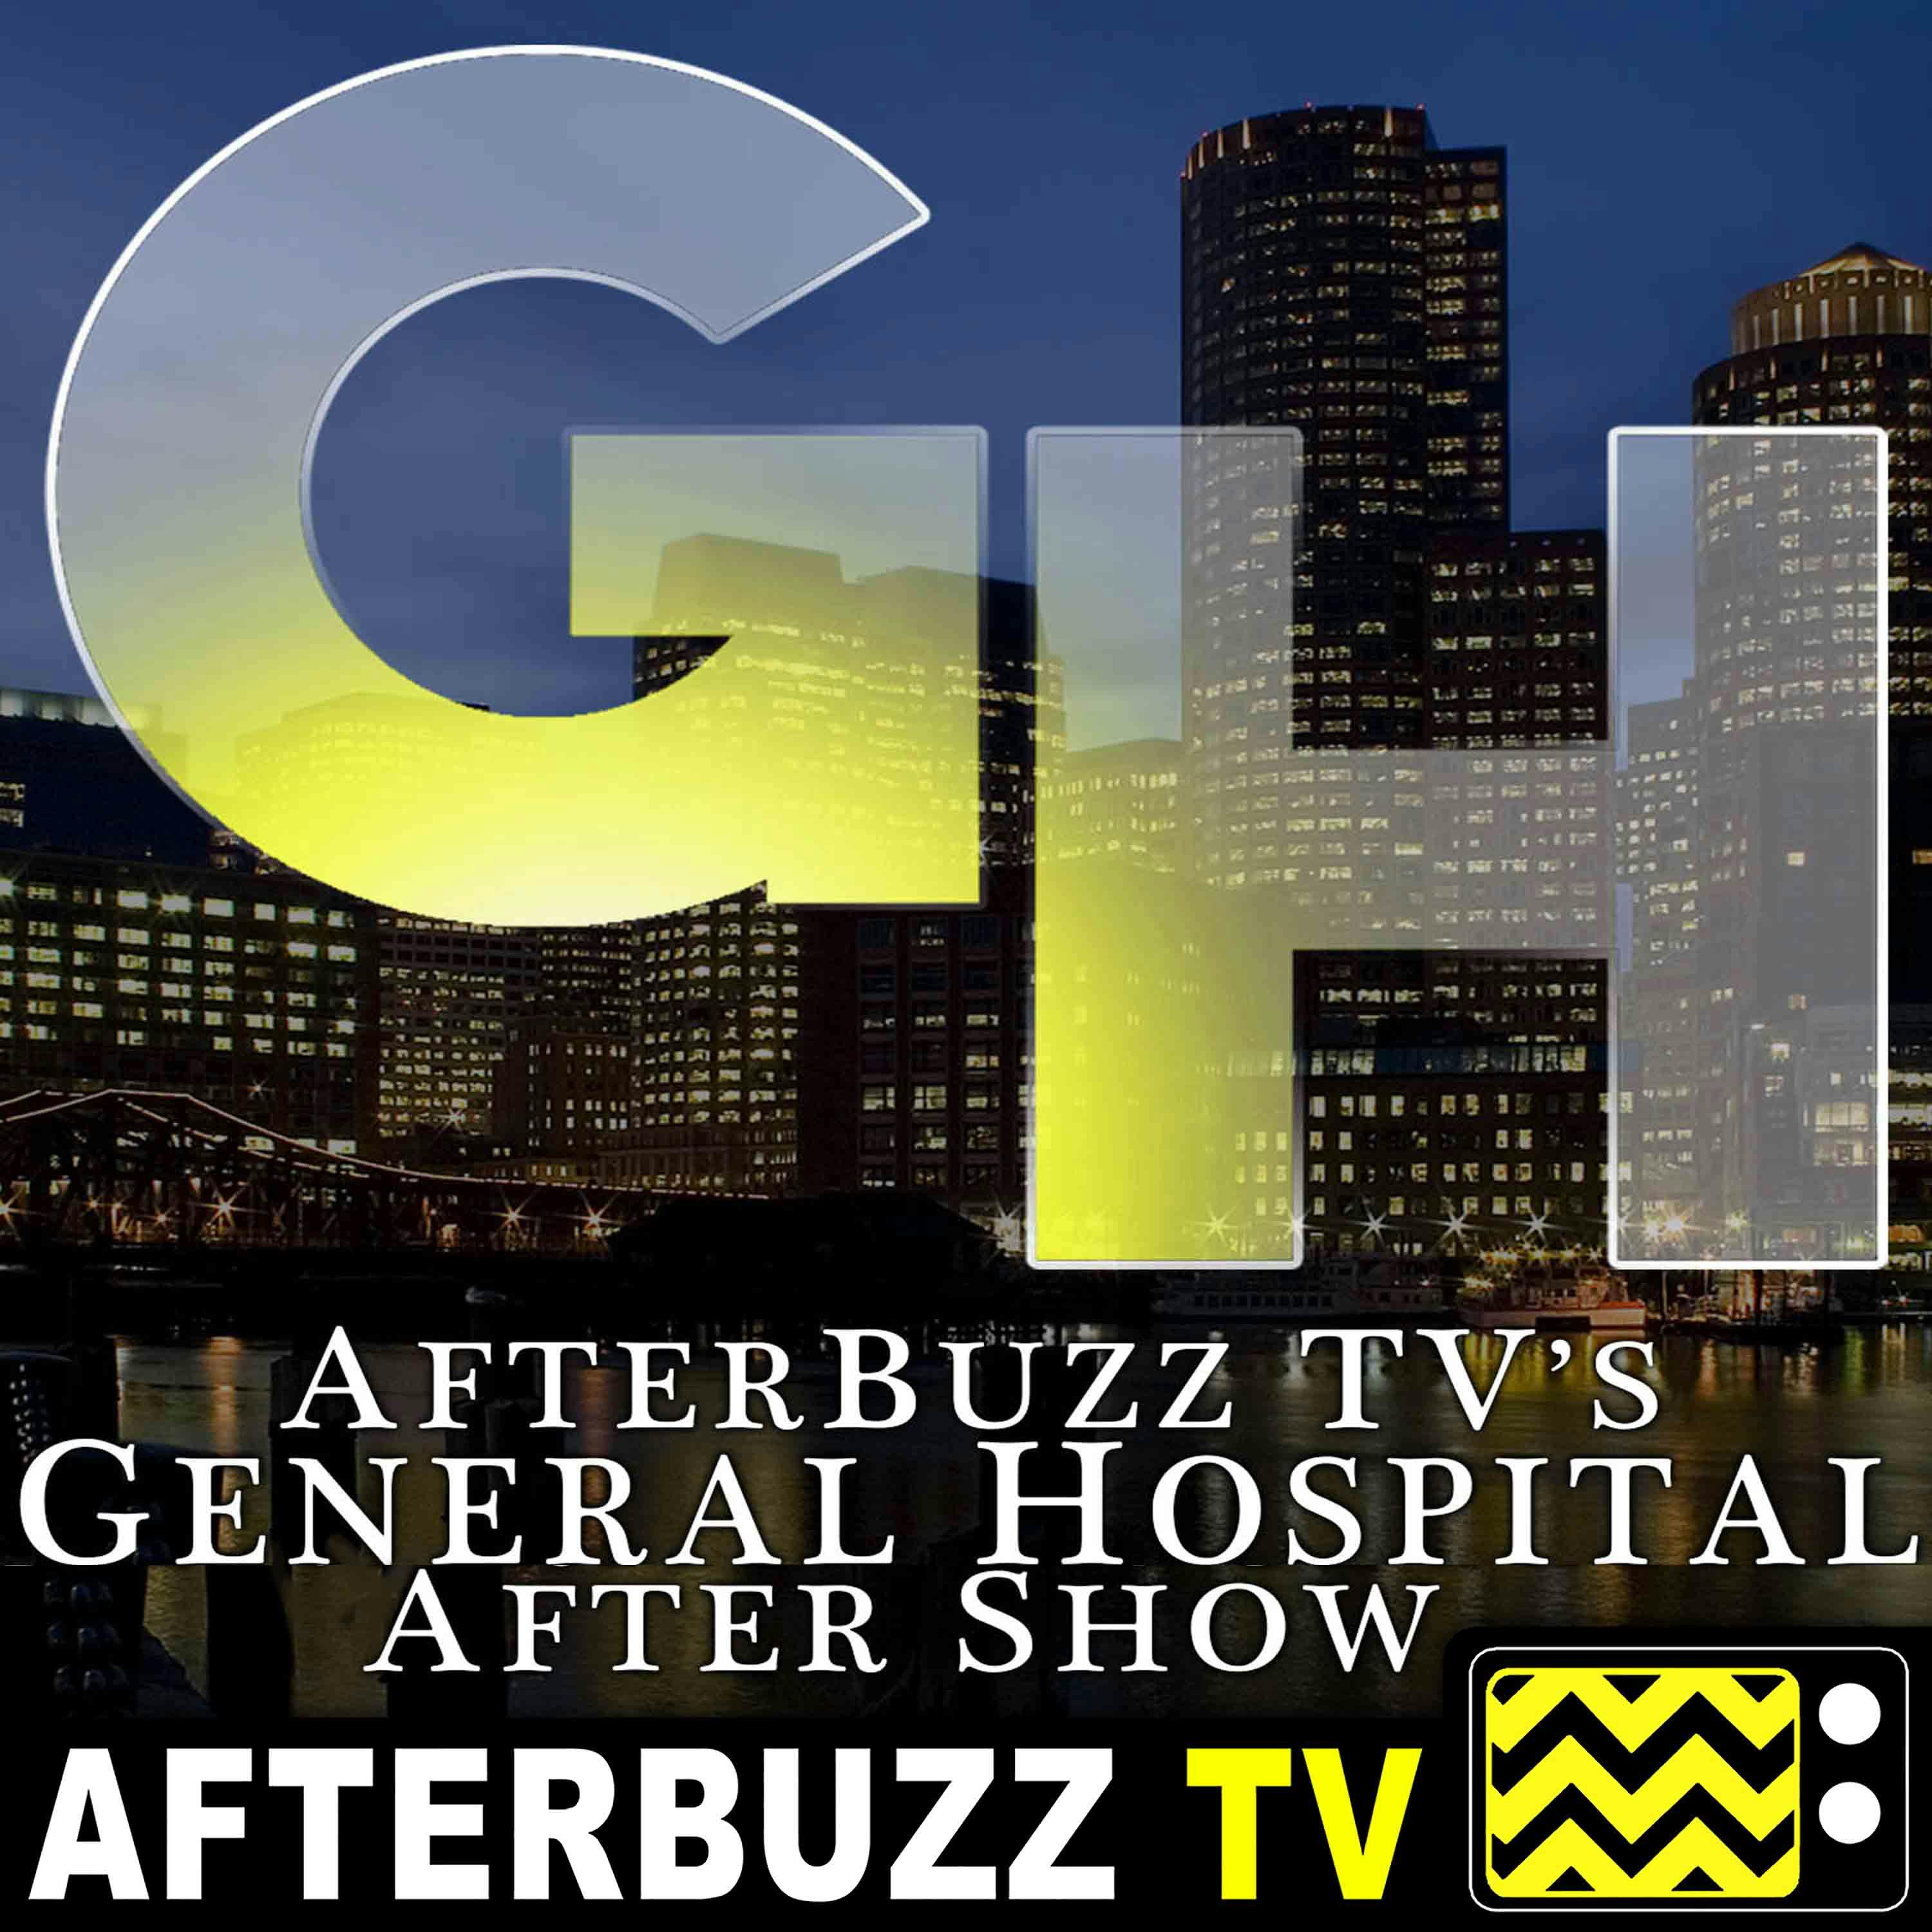 Review Of General Hospital for December 3rd - December 7th, 2018